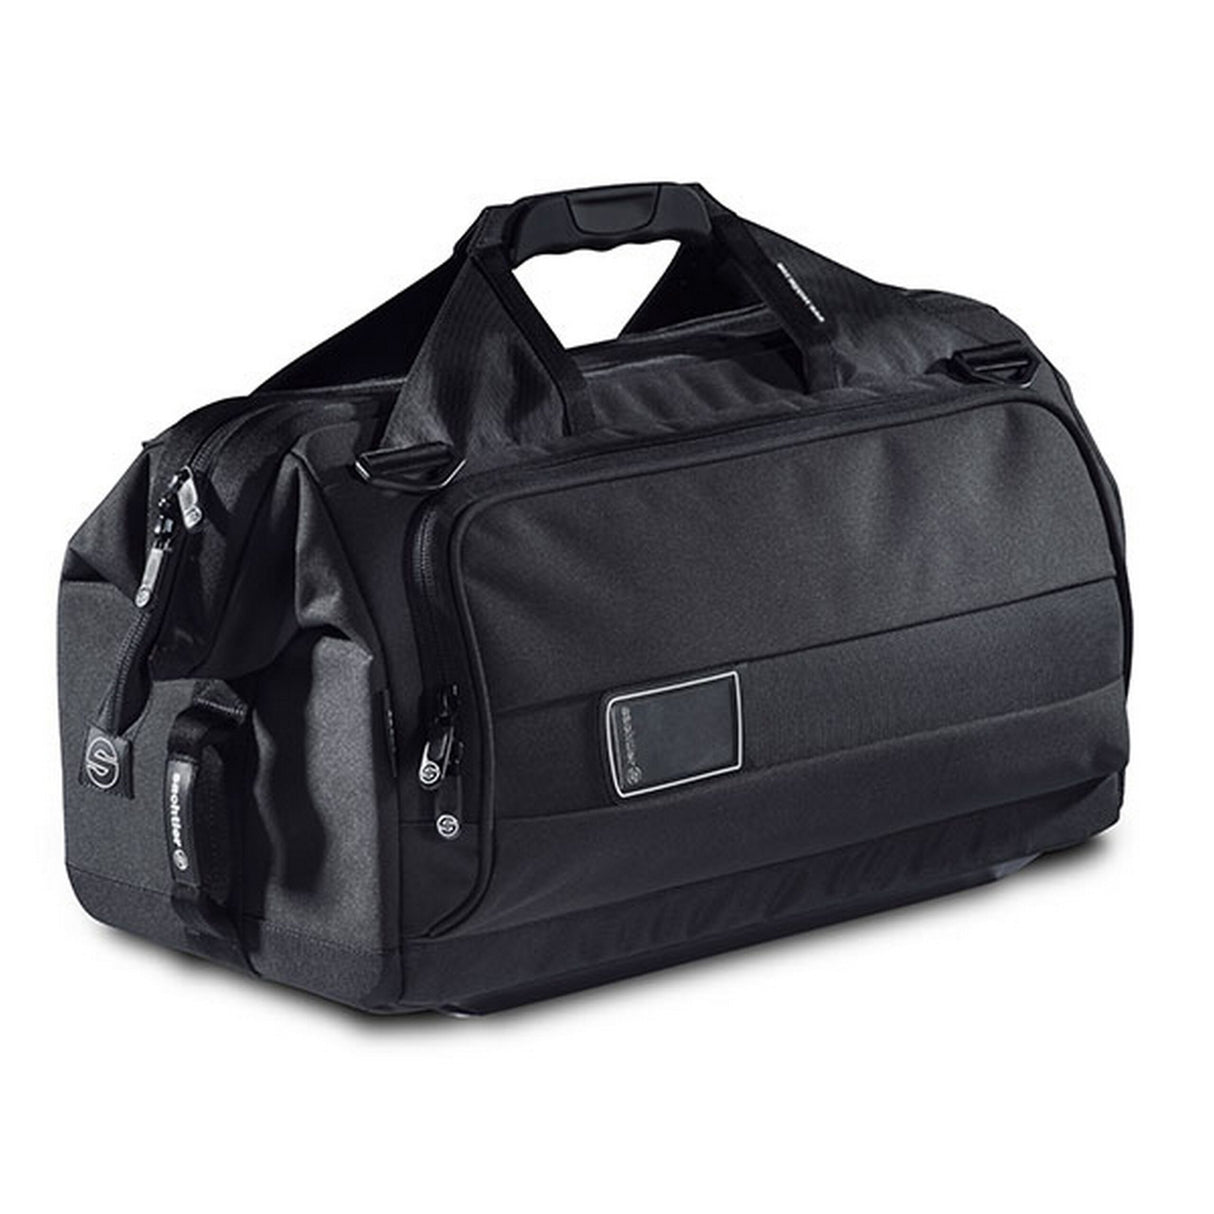 Sachtler SC004 Dr. Bag 4 for Cameras with Accessories